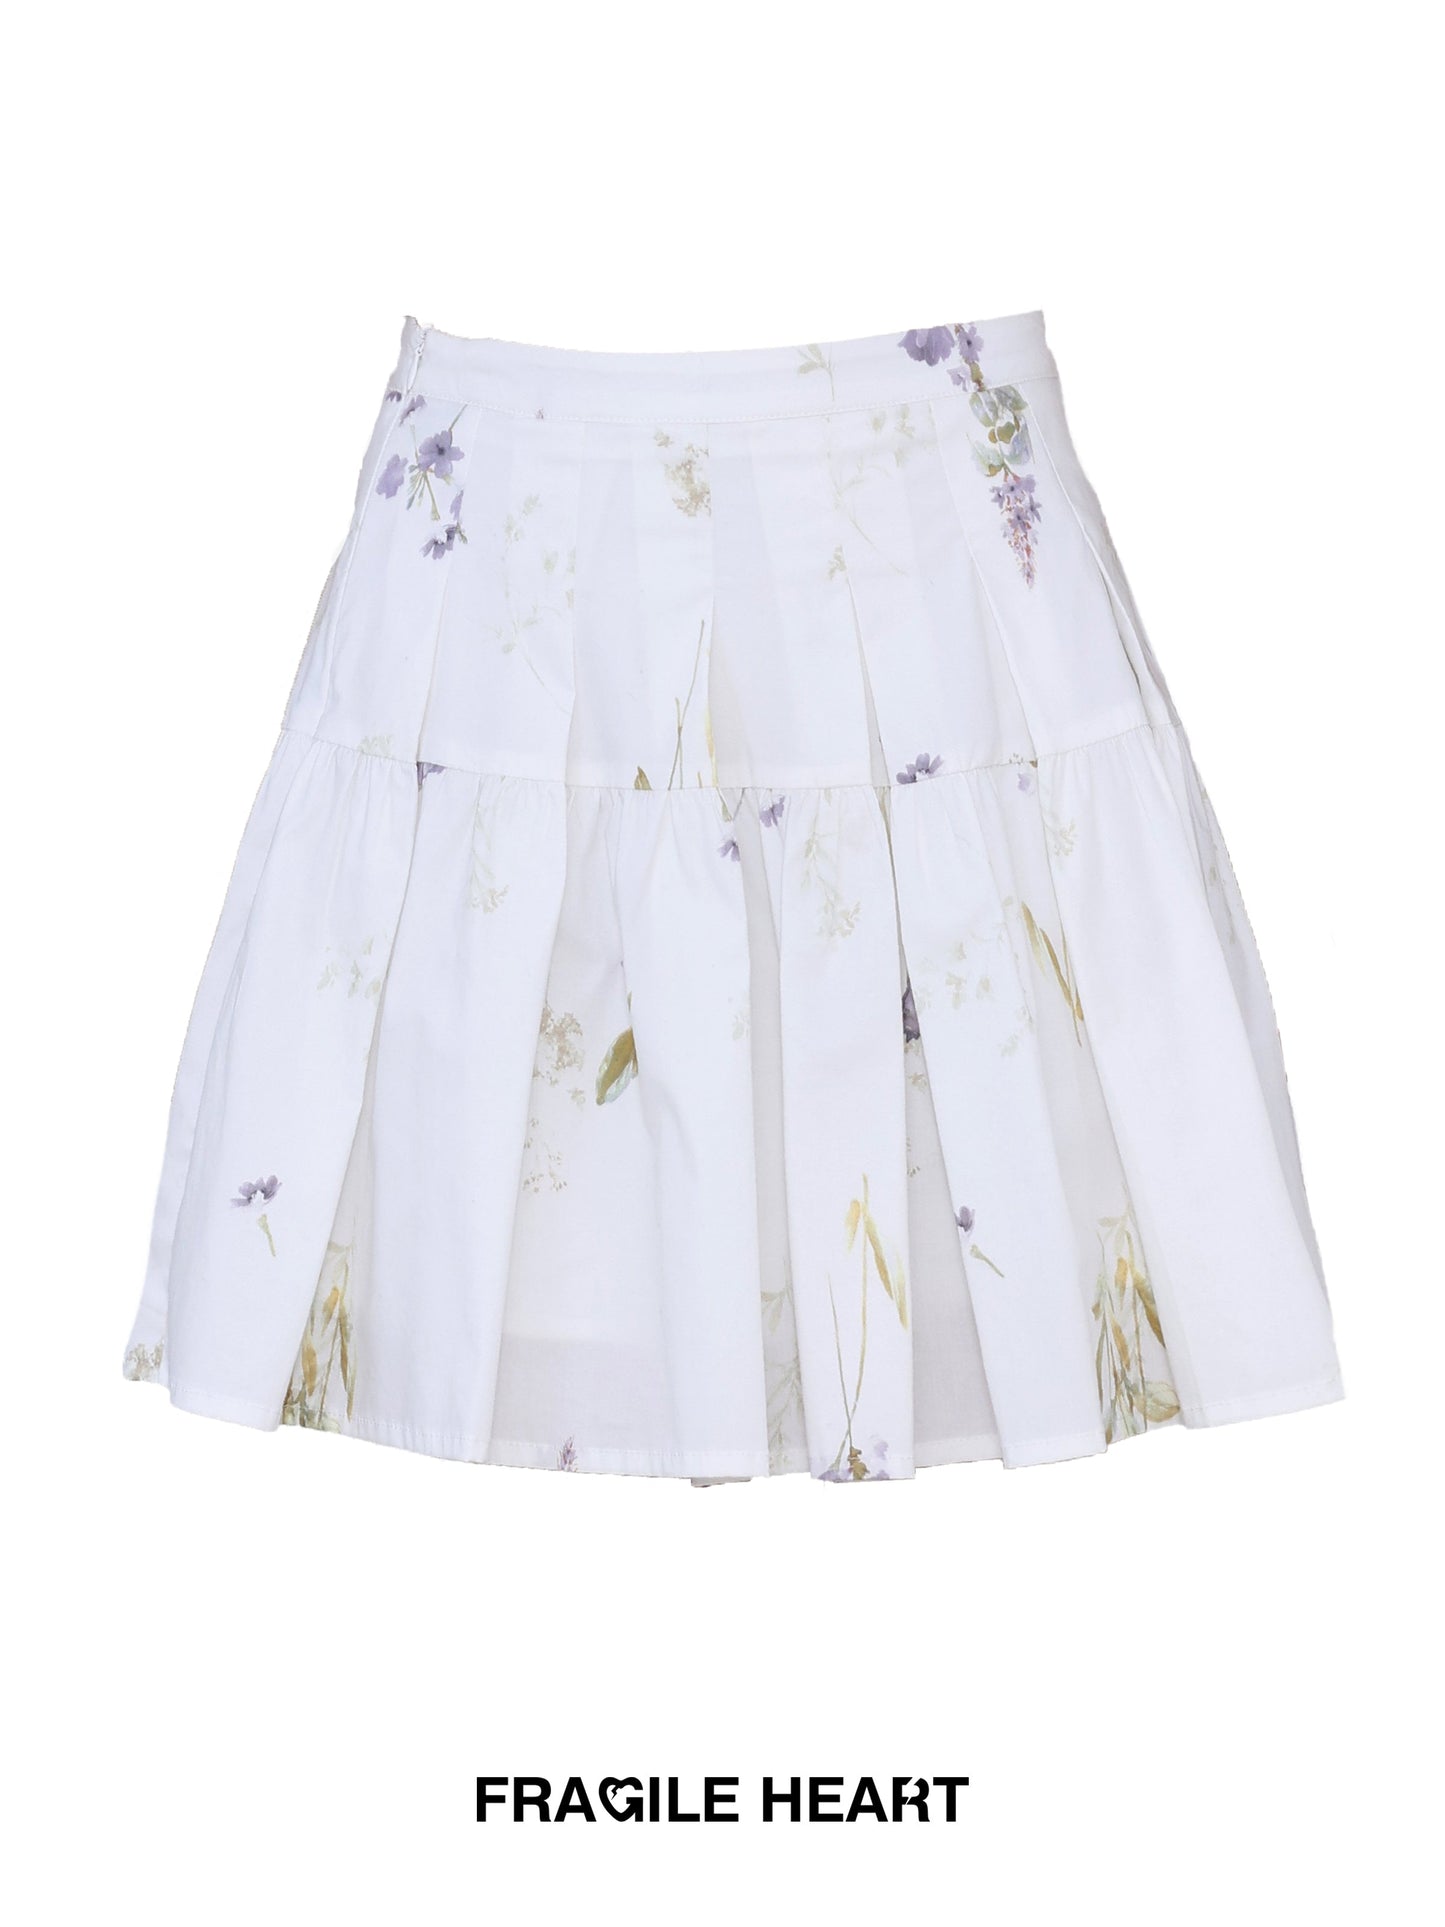 White Top and Pleated Skirt